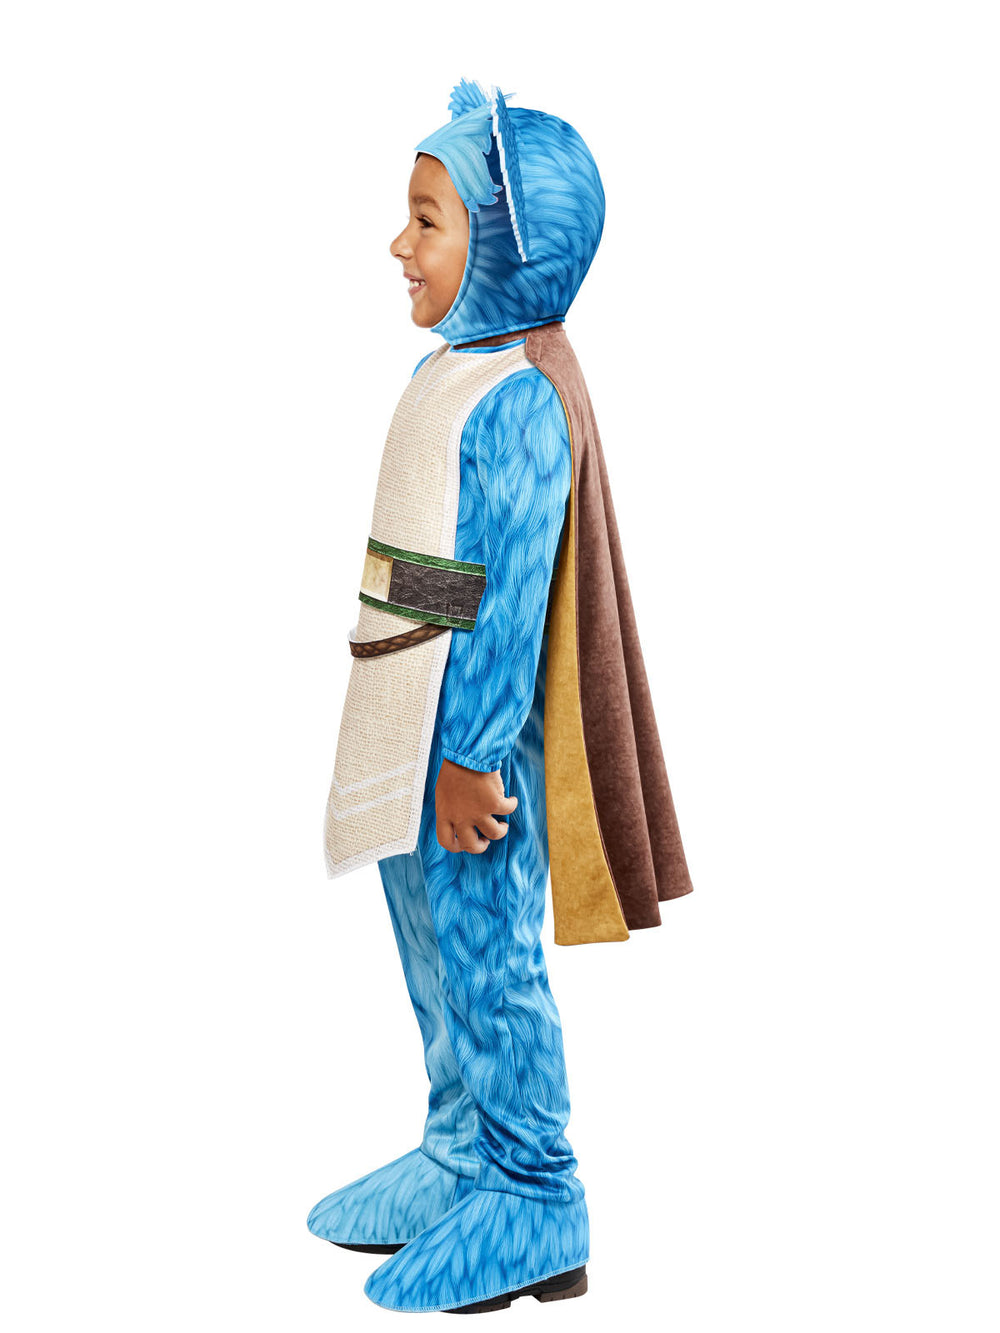 NUBS YOUNG JEDI ADVENTURES DELUXE COSTUME, CHILD - Little Shop of Horrors